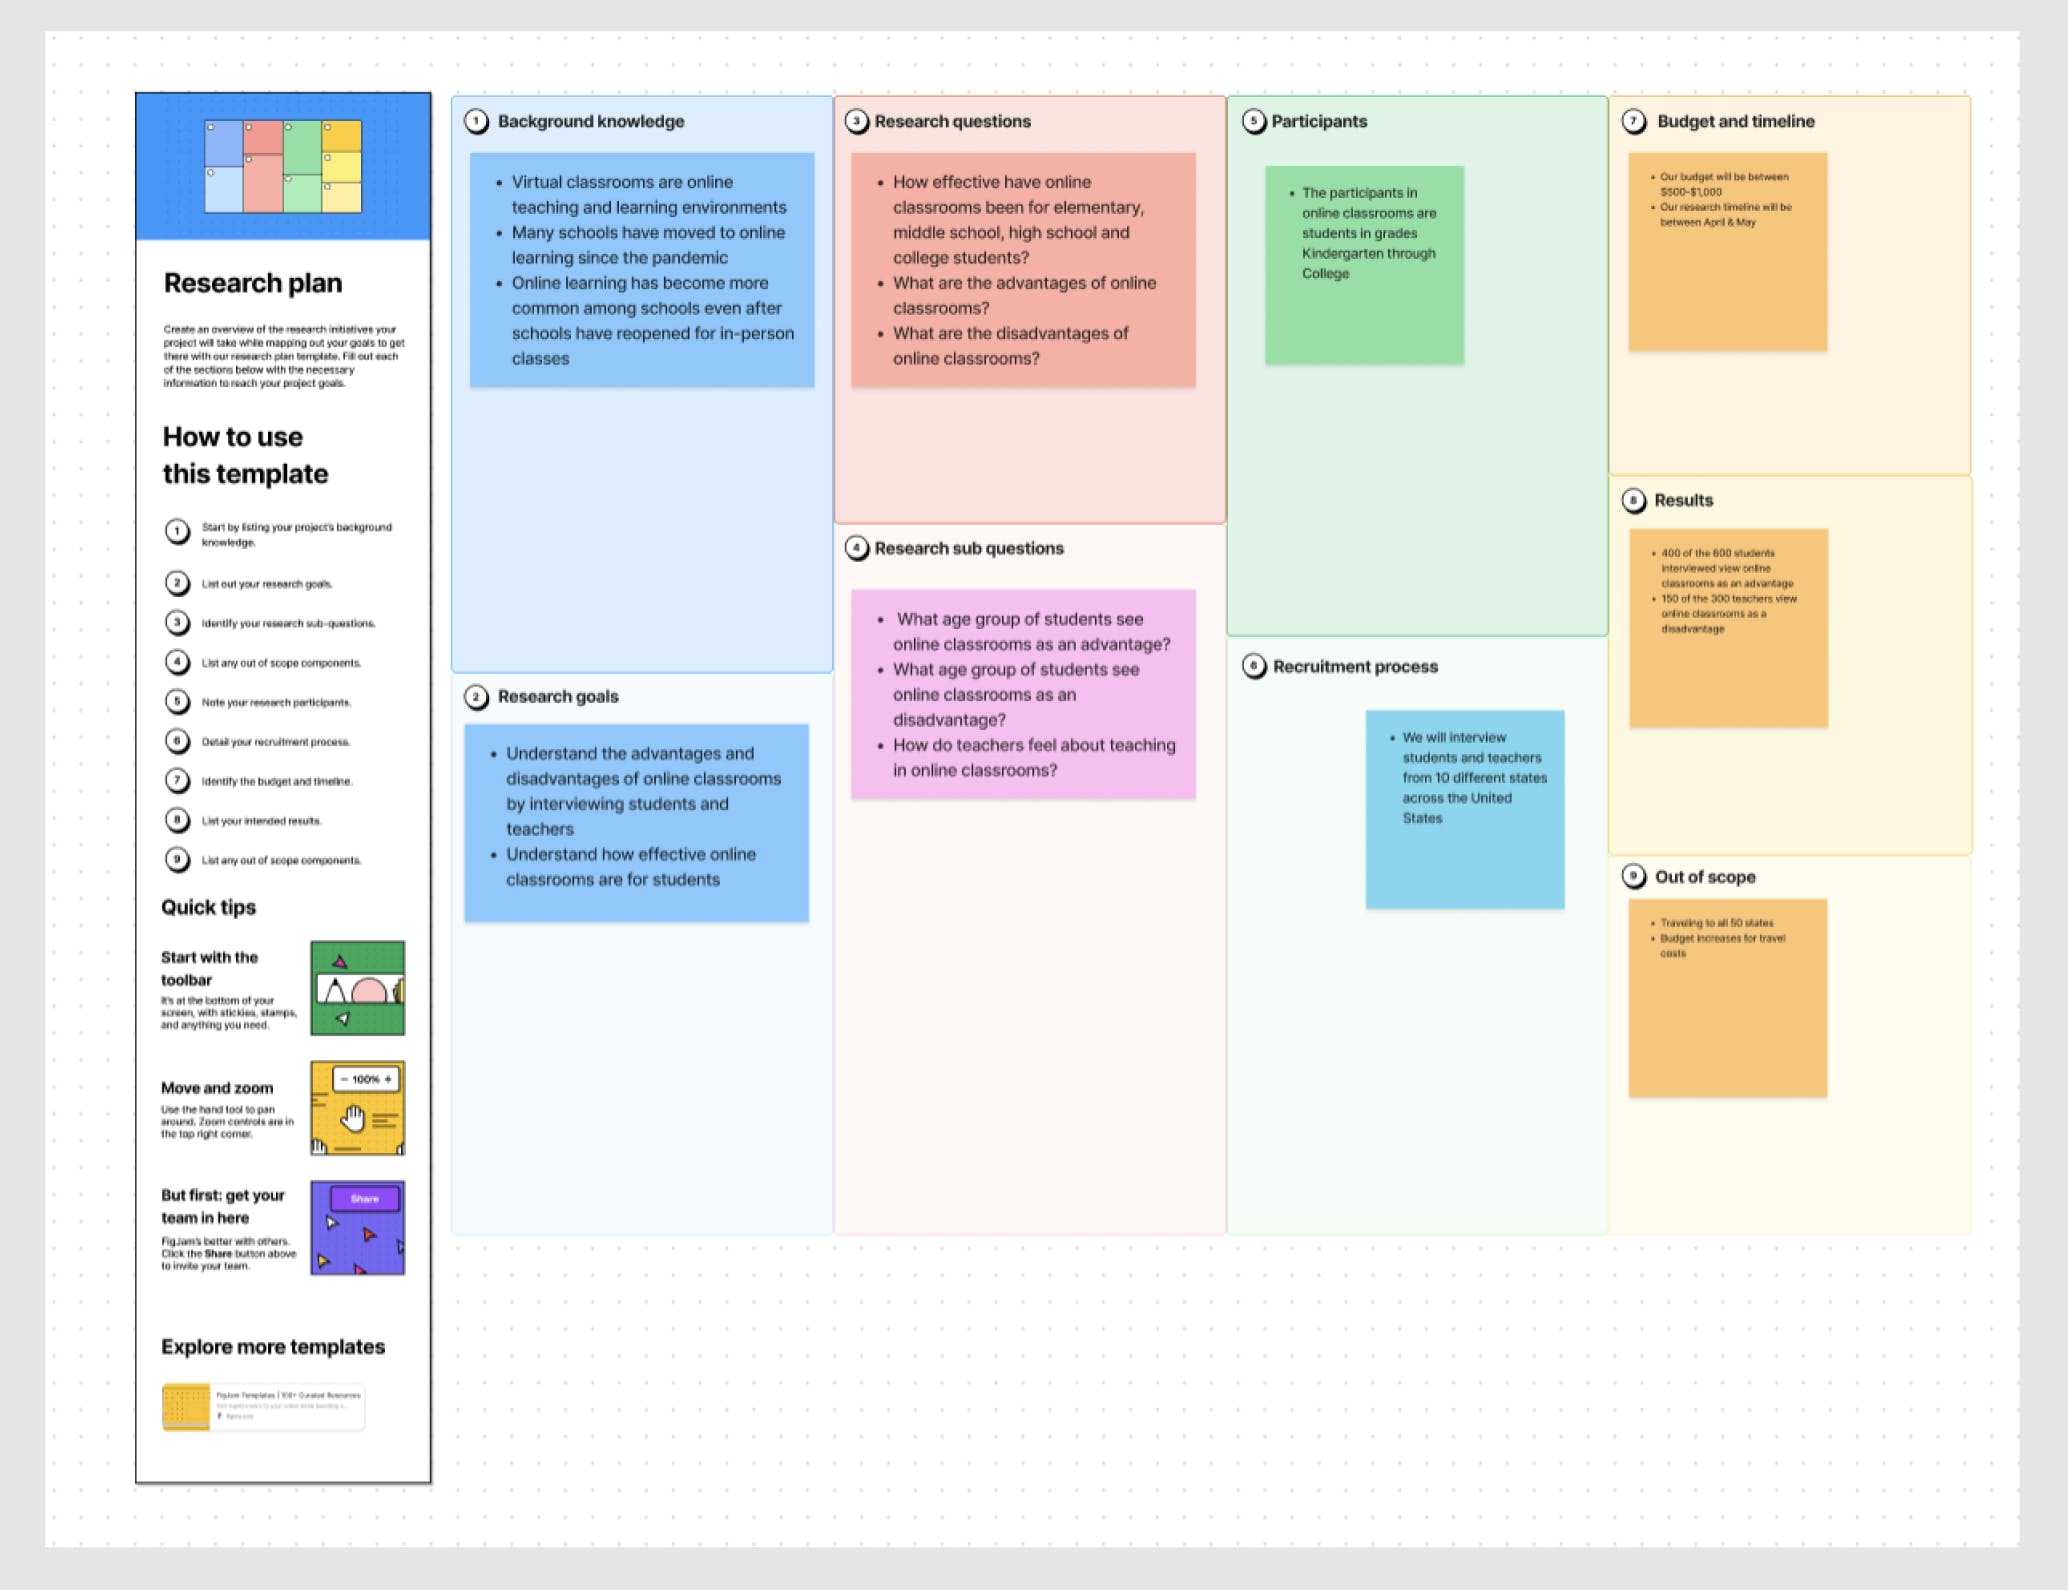 Research plan template used in Dribbble's Product Design program